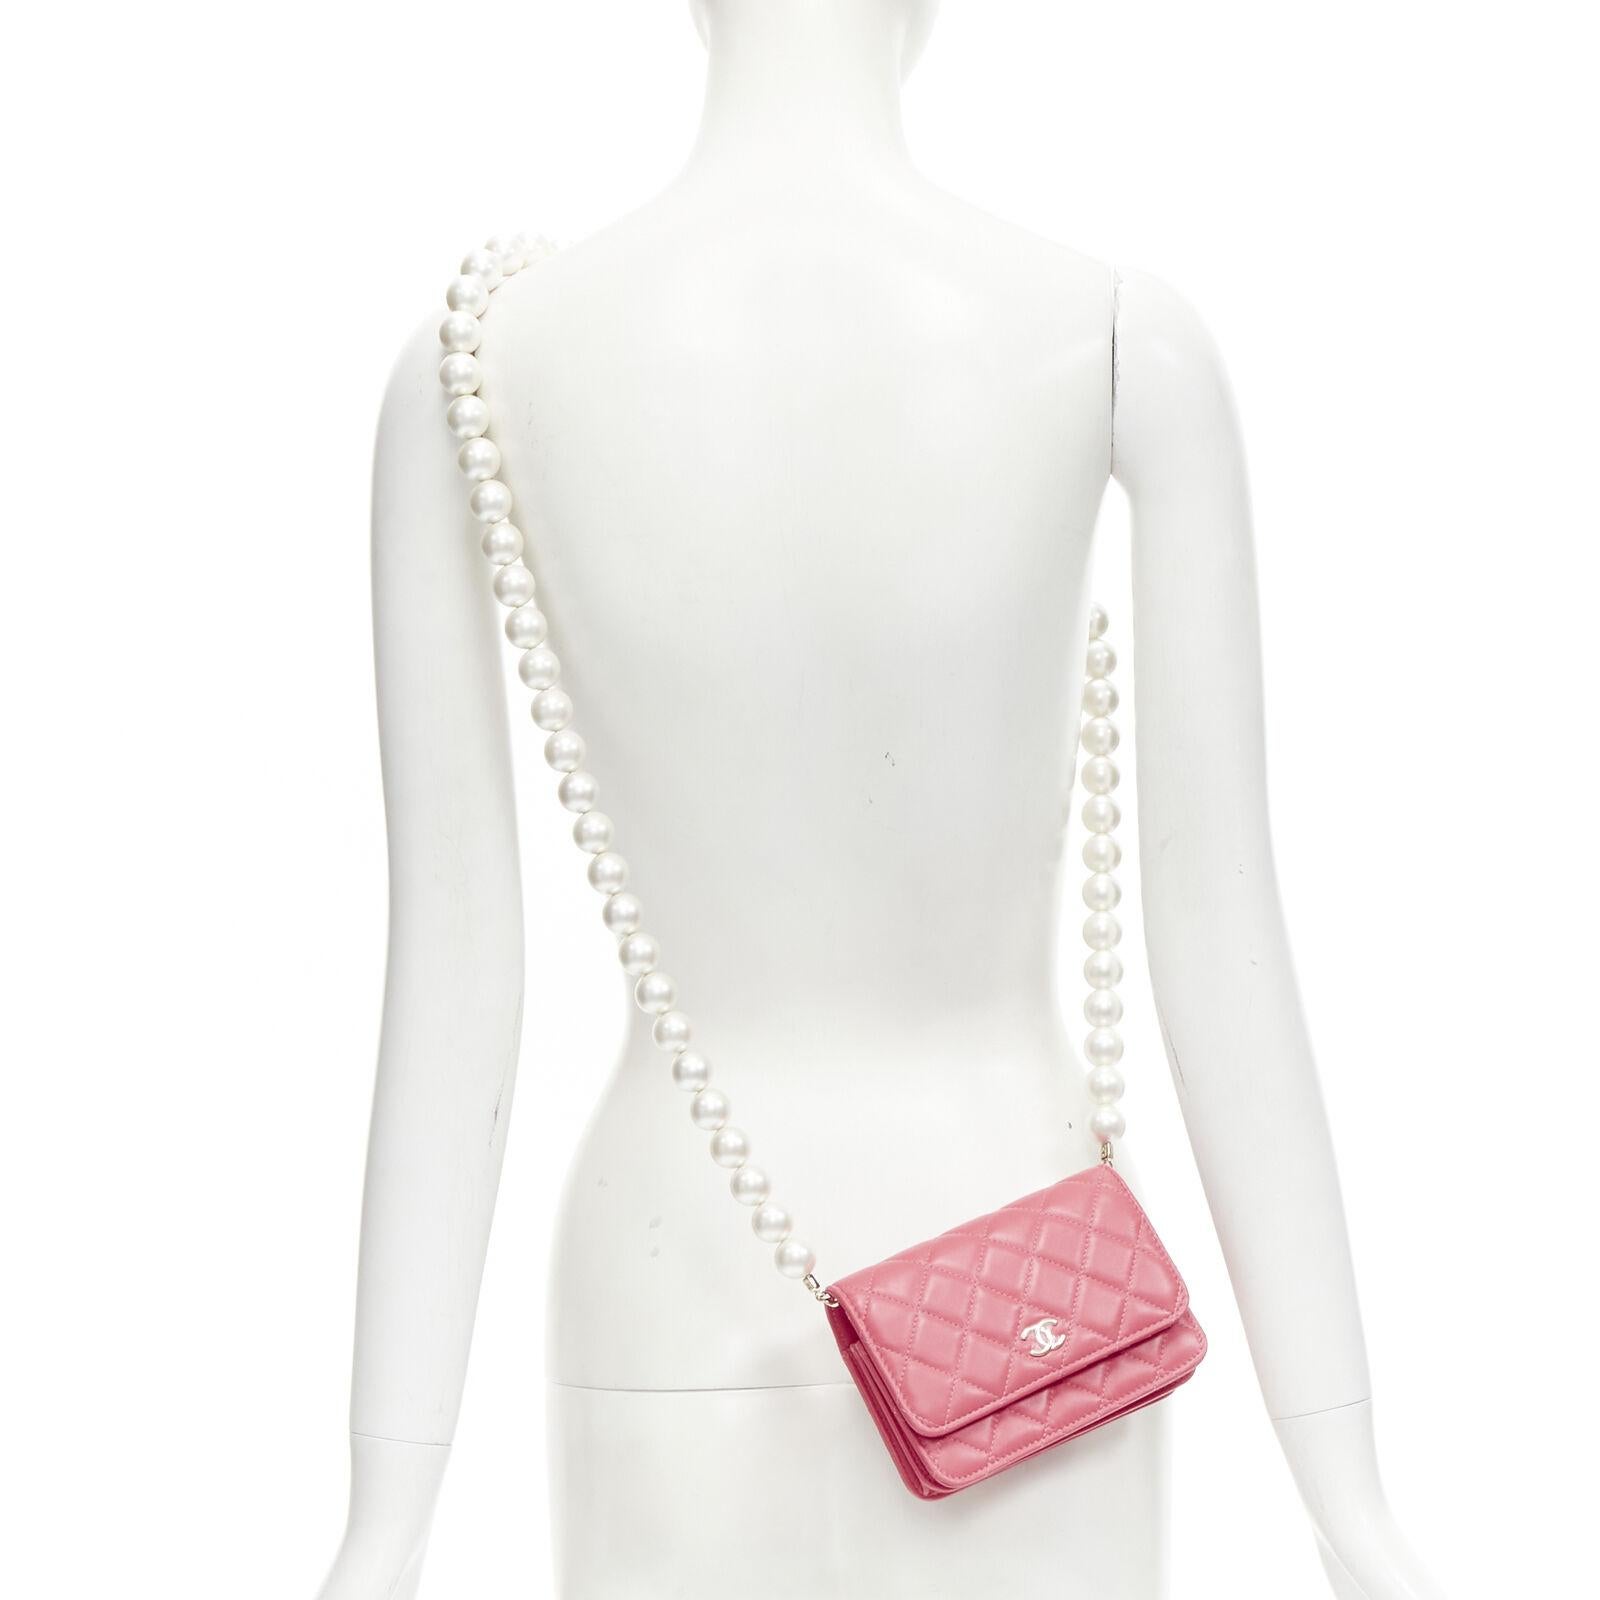 CHANEL 2021 XL pearl pink quilted leather flap wallet on chain crossbody bag
Reference: AAWC/A00398
Brand: Chanel
Designer: Virginie Viard
Collection: 2021
Material: Leather, Plastic
Color: Pink, White
Pattern: Solid
Closure: Magnet
Lining: